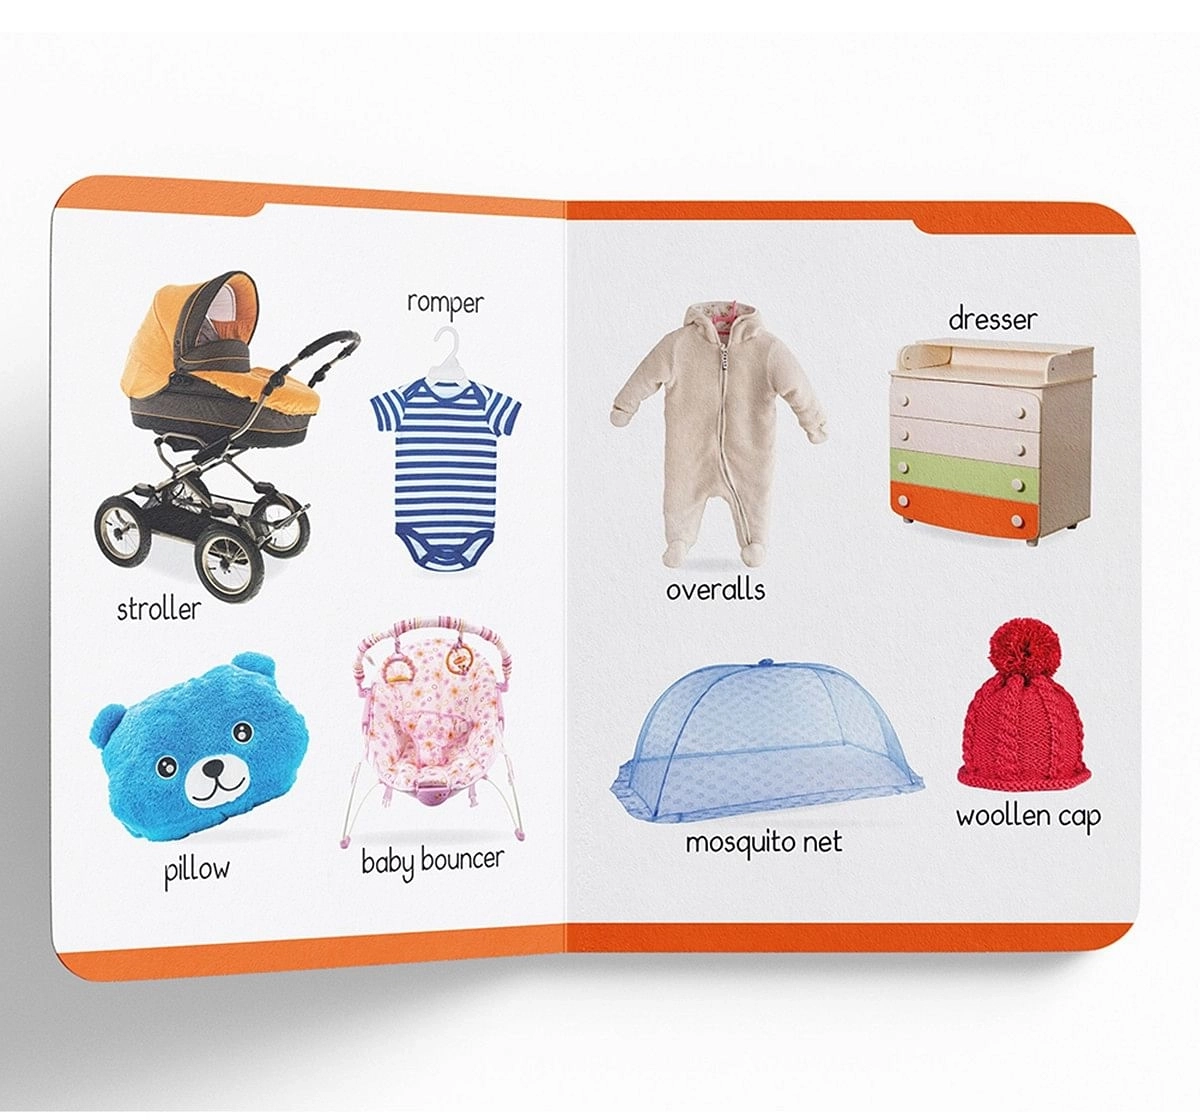 My First Padded Book Of Baby Objects, 26 Pages Book By Wonder House Books, Board Book